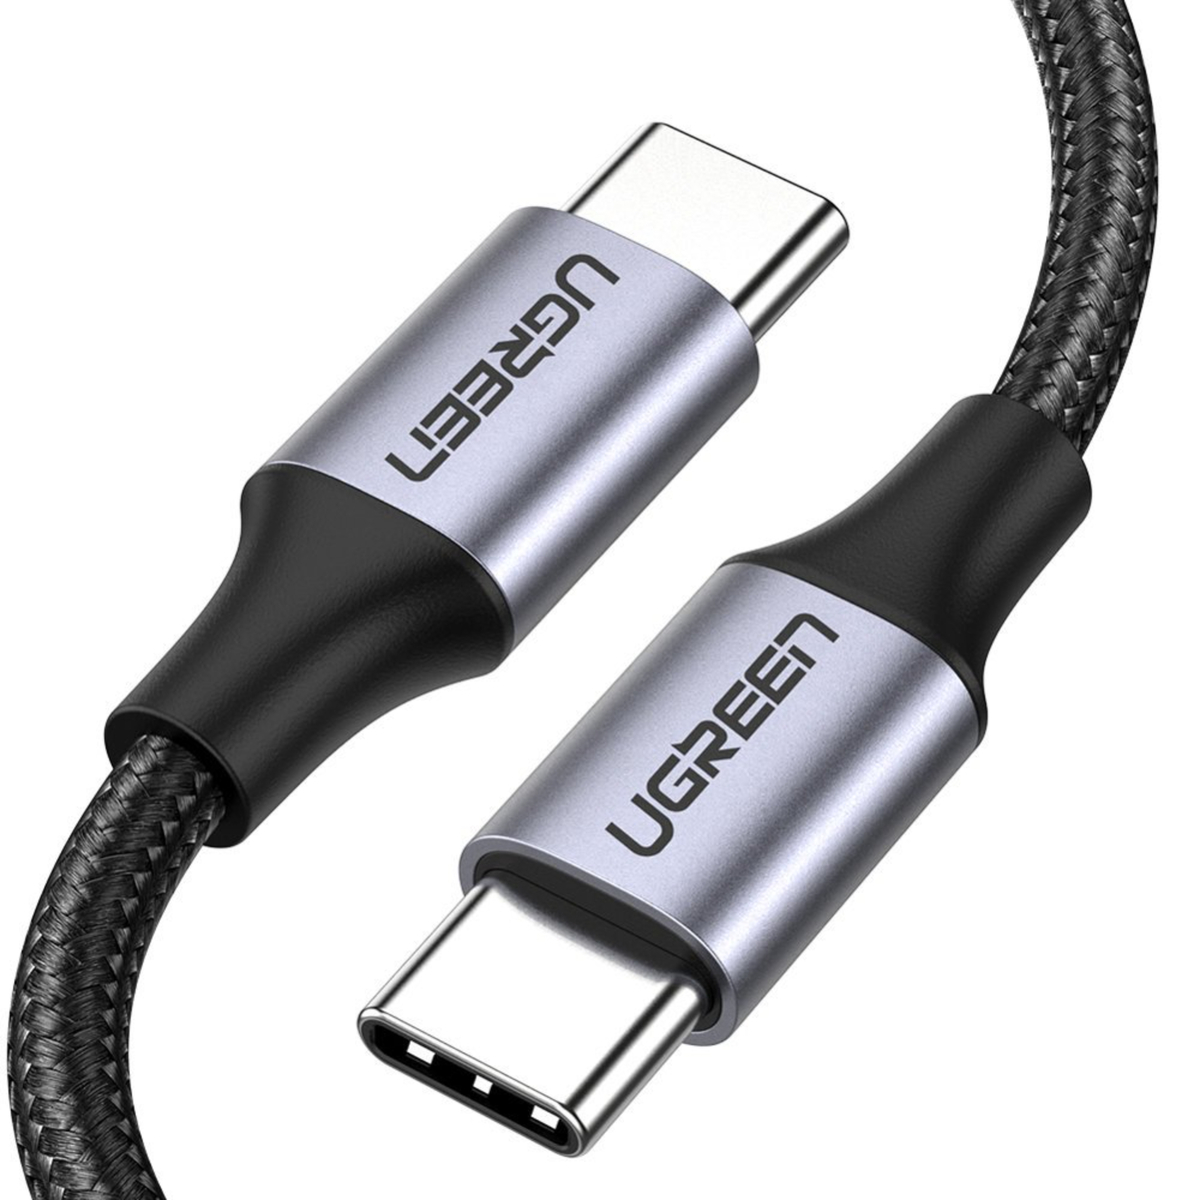 Ugreen USB-C to C Quick Charge Cable Aluminum Case with Nylon Braided, 3A, PD 60 W, 1 m, Gray/Black, US261